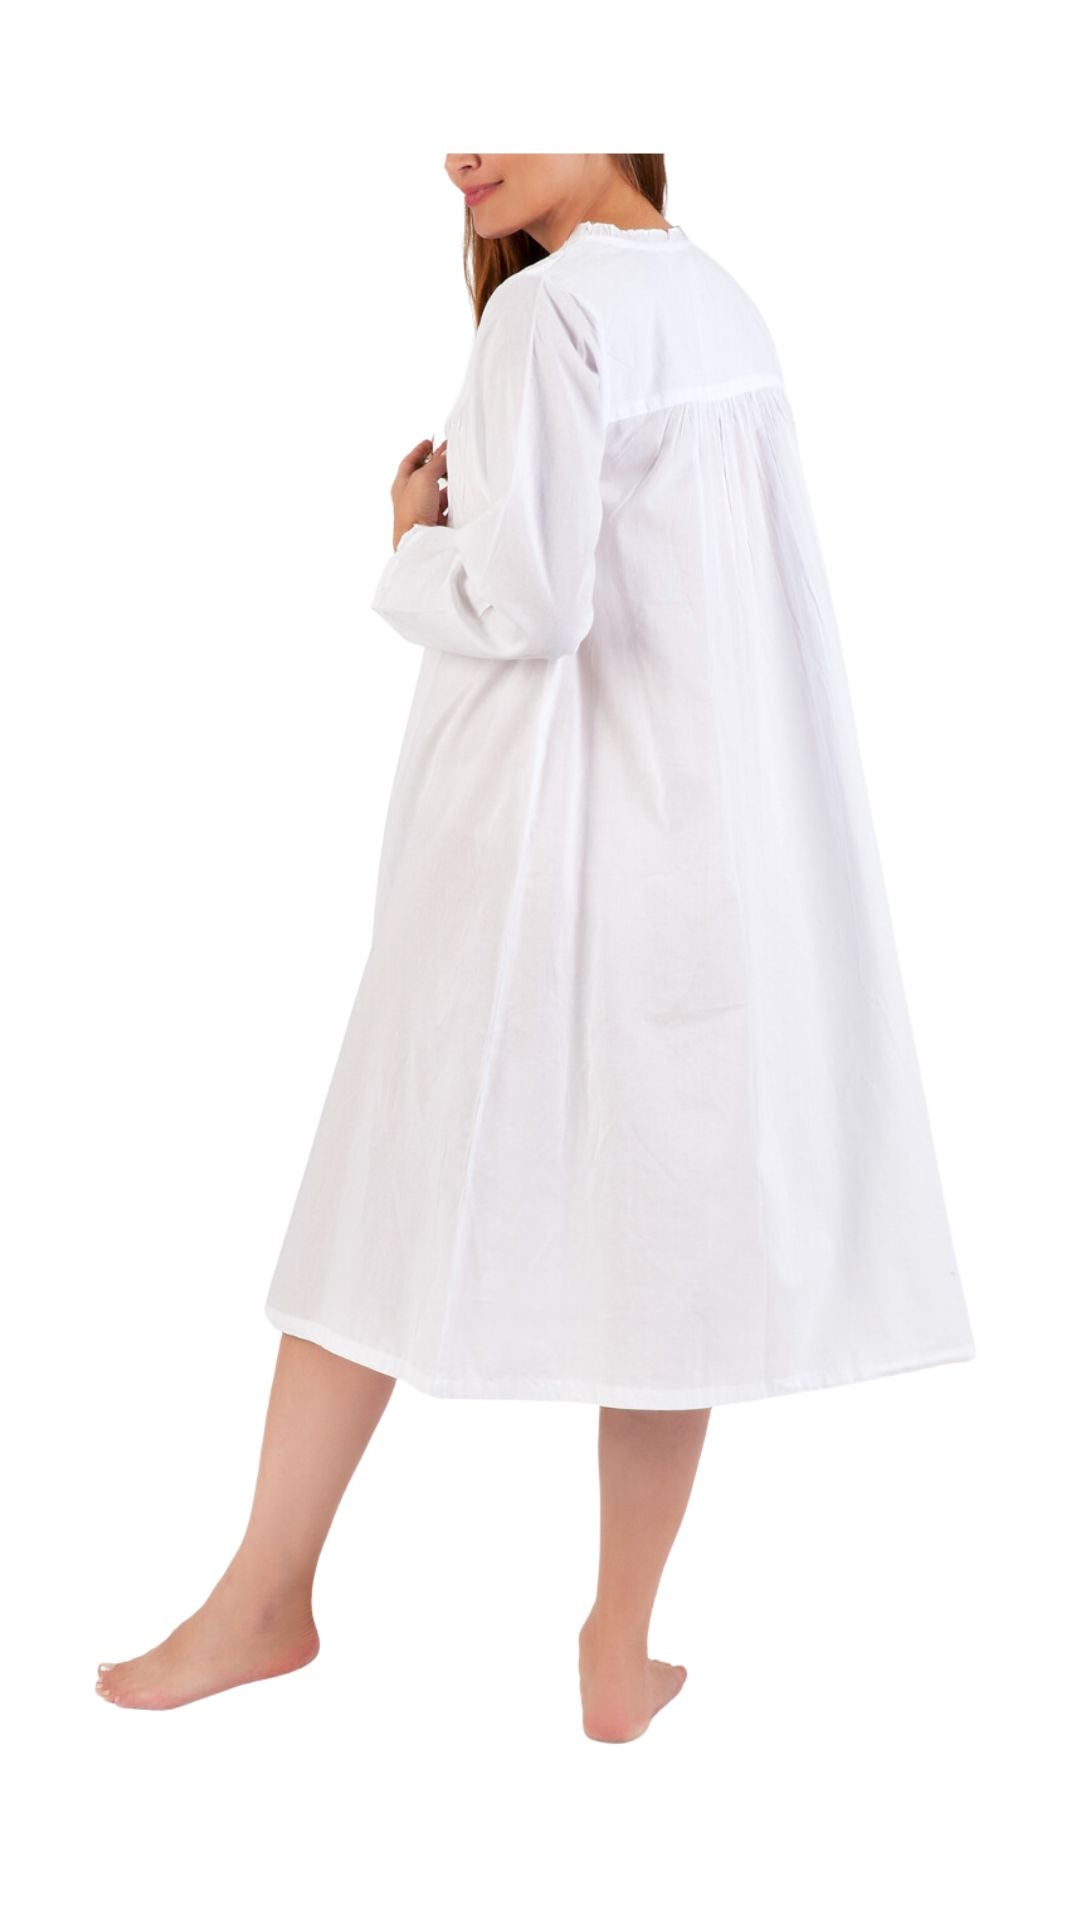 soft cool and floaty cotton sleepwear